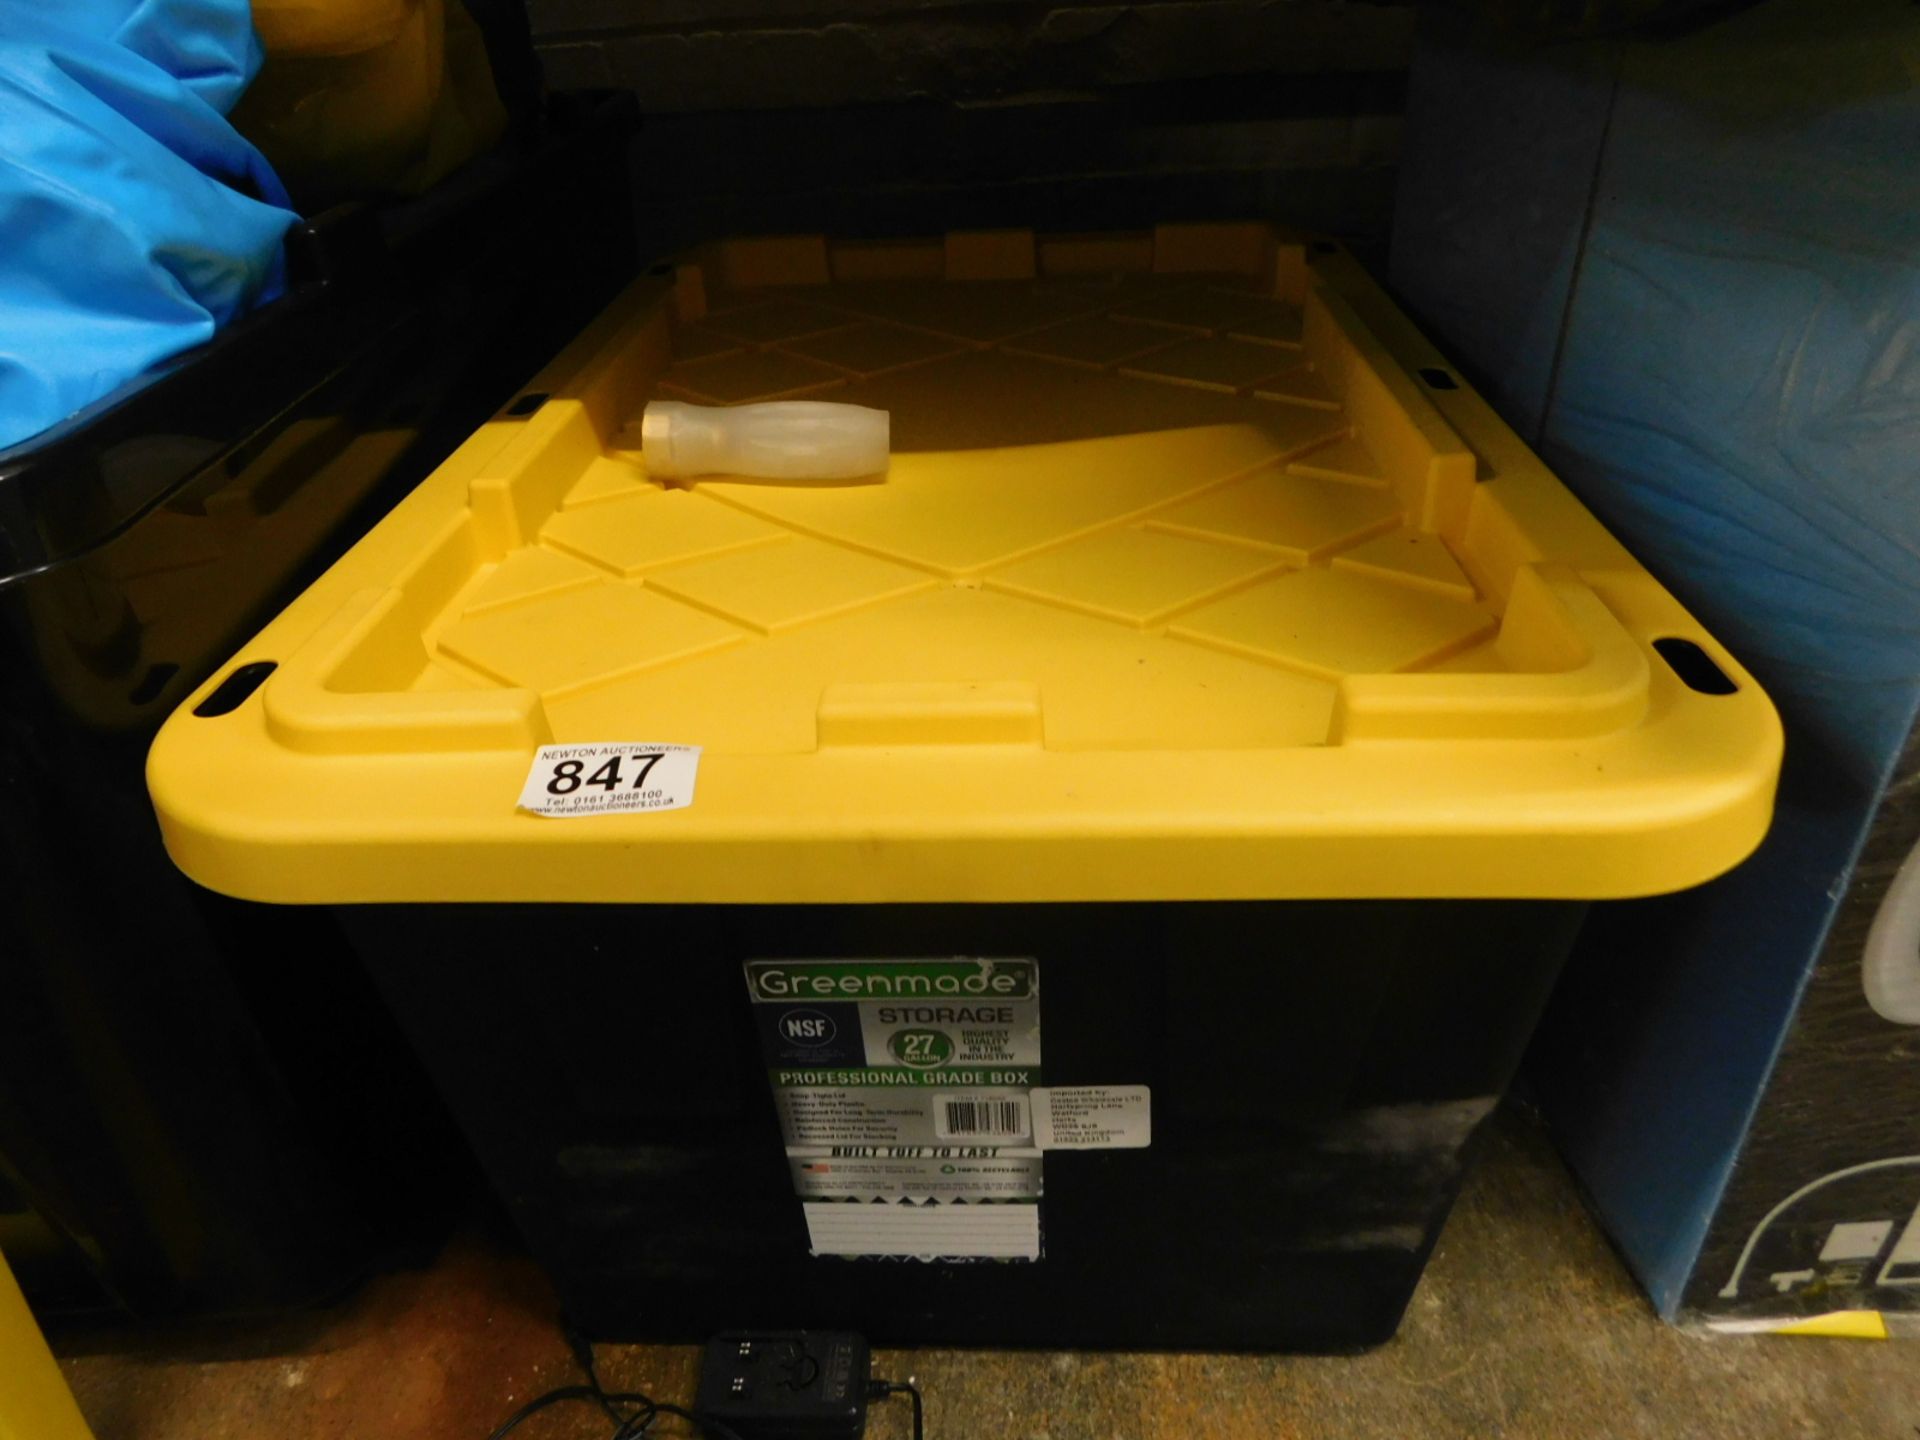 1 GREENMADE PROFESSIONAL GRADE STORAGE SYSTEM BOX (27 GALLONS) RRP Â£29.99